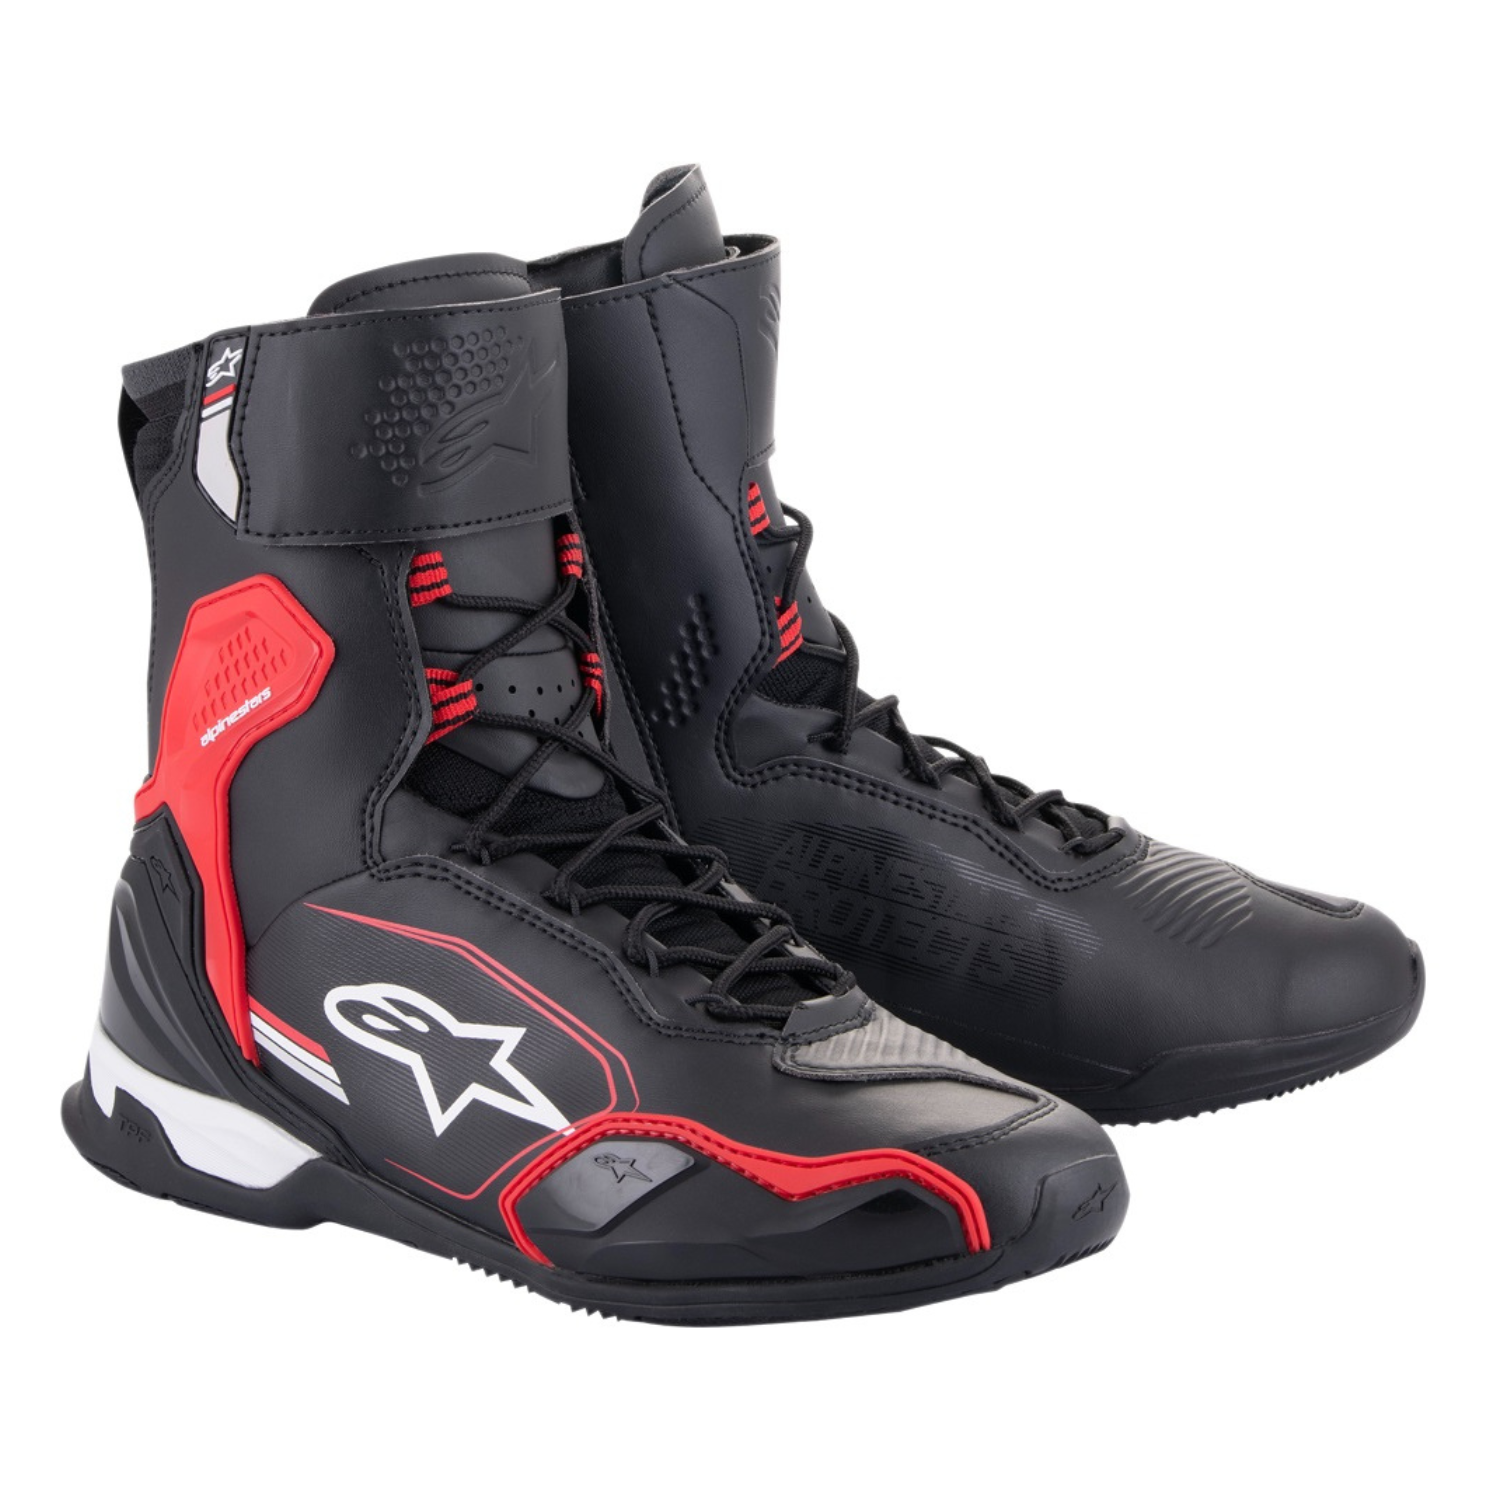 Image of Alpinestars Superfaster Shoes Black Bright Red White Size US 8 EN